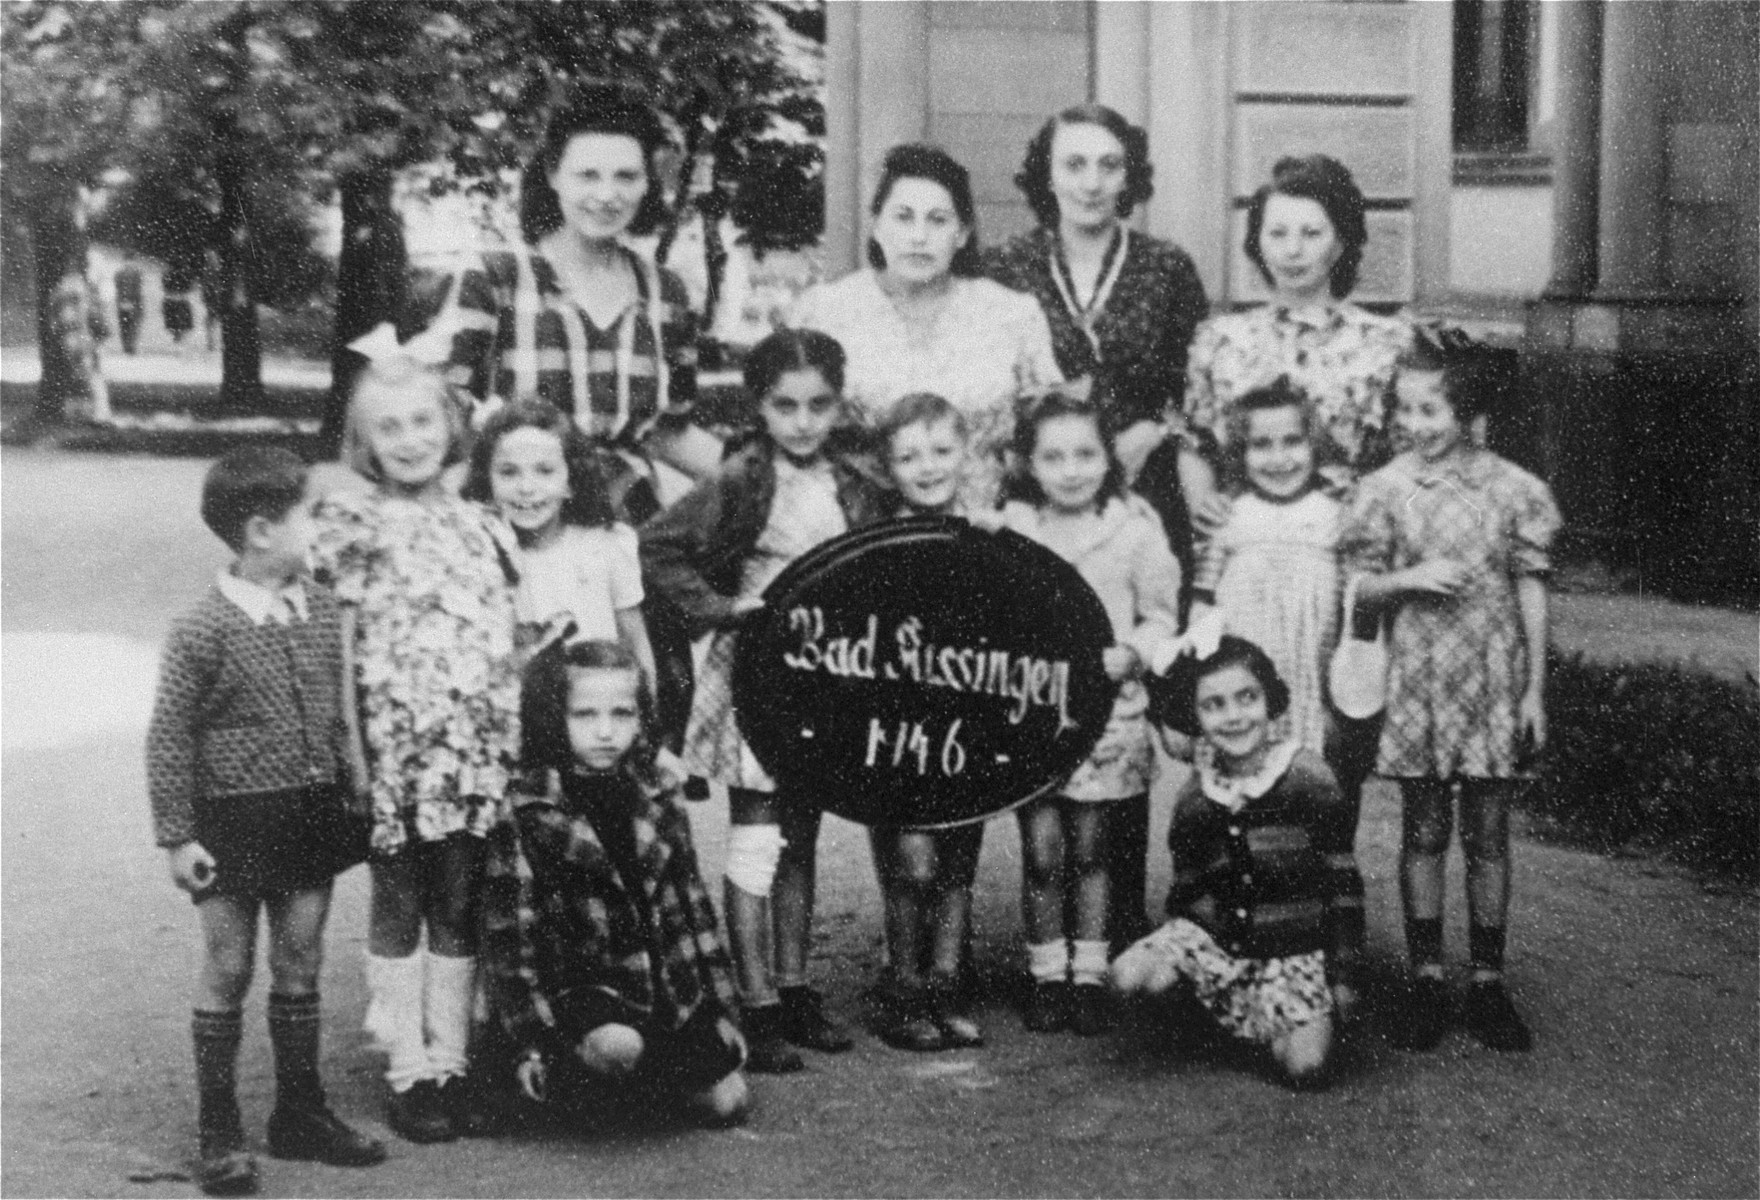 Group portrait of Jewish DP women and children at the Bad Kissingen displaced persons camp.  The children survived the war in hiding.

Among those pictured is Esther Zelowicz (now Edith Cove) standing in the back row, first on the left.